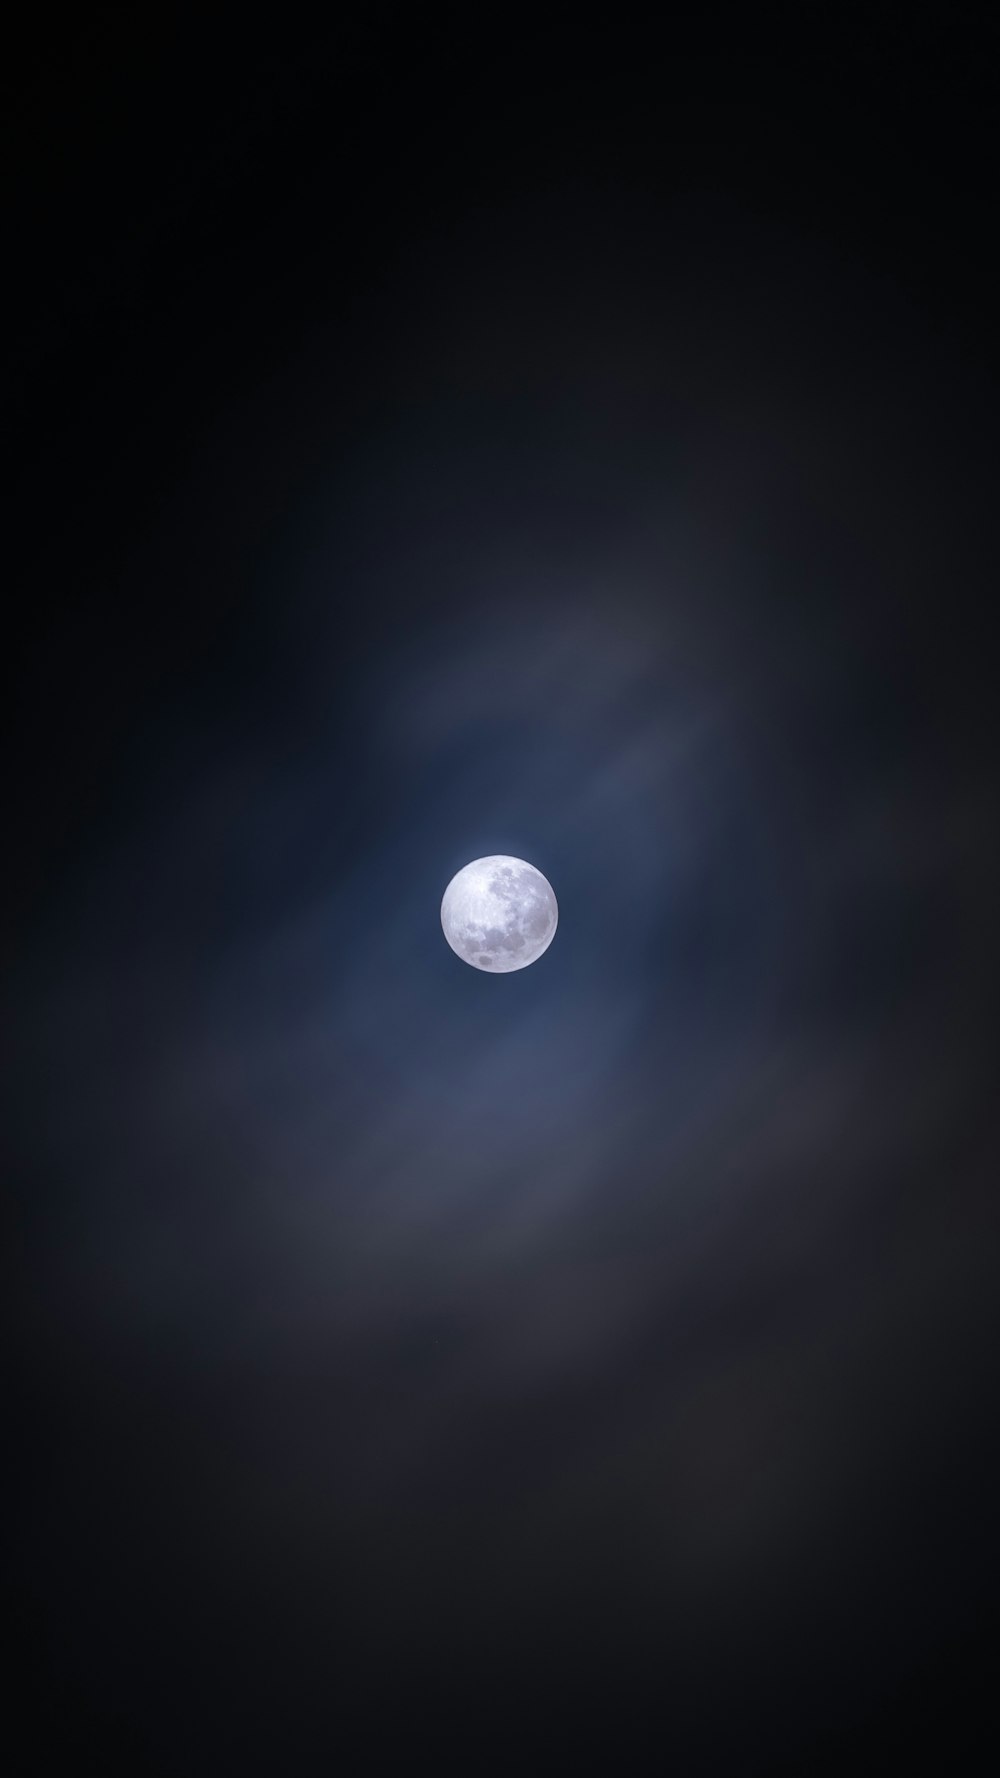 a full moon seen through the clouds in the night sky